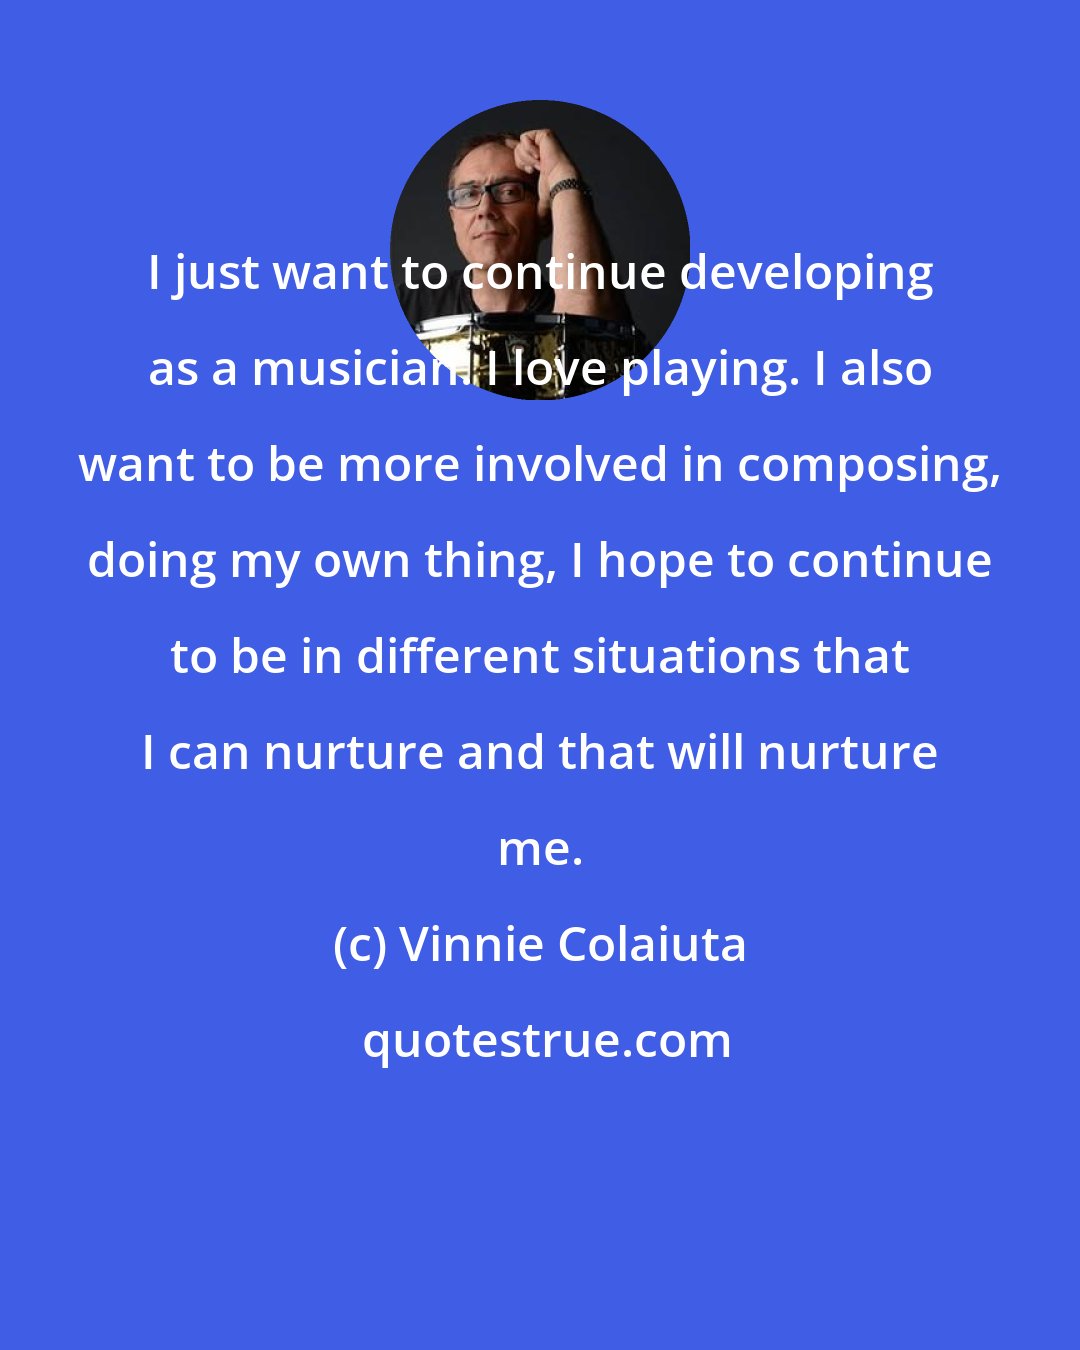 Vinnie Colaiuta: I just want to continue developing as a musician. I love playing. I also want to be more involved in composing, doing my own thing, I hope to continue to be in different situations that I can nurture and that will nurture me.